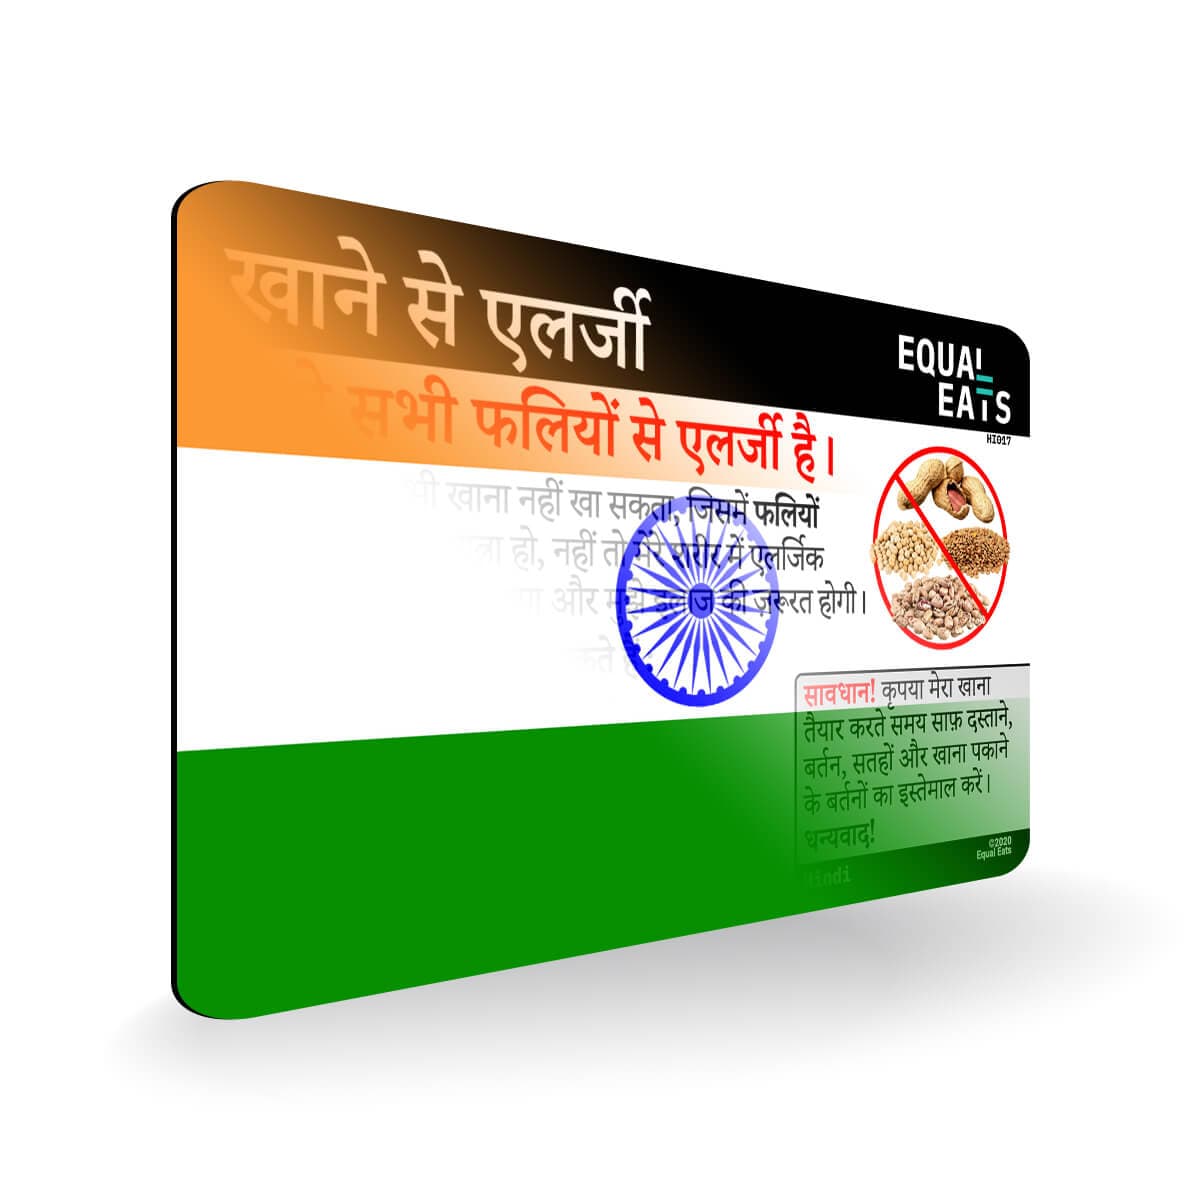 Legume Allergy in Hindi. Legume Allergy Card for India